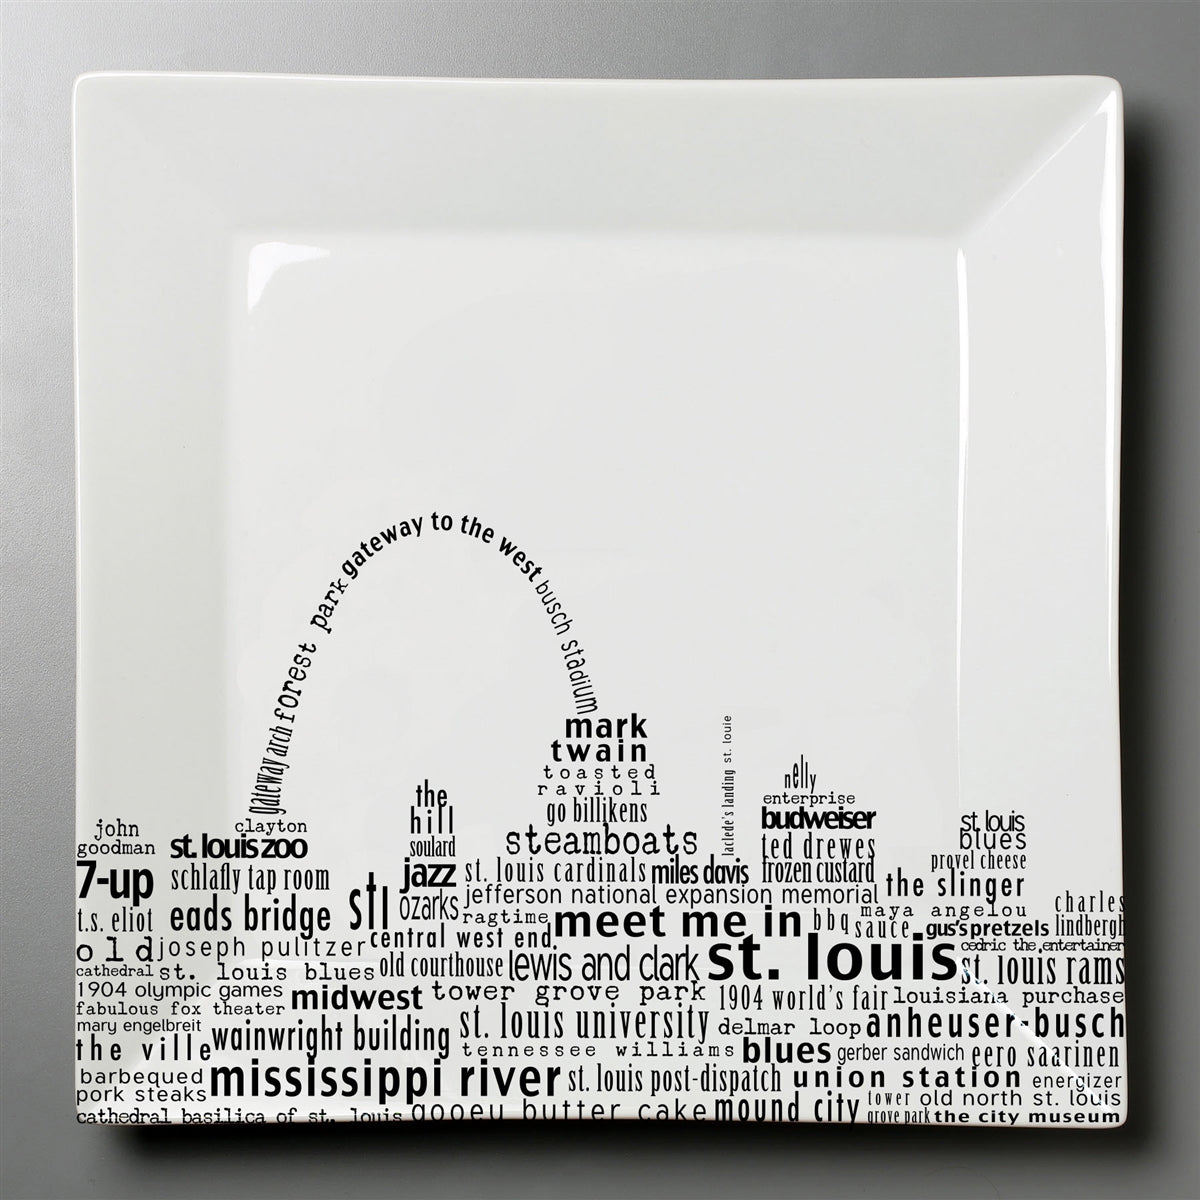 St. Louis Dish - Small Square Plate